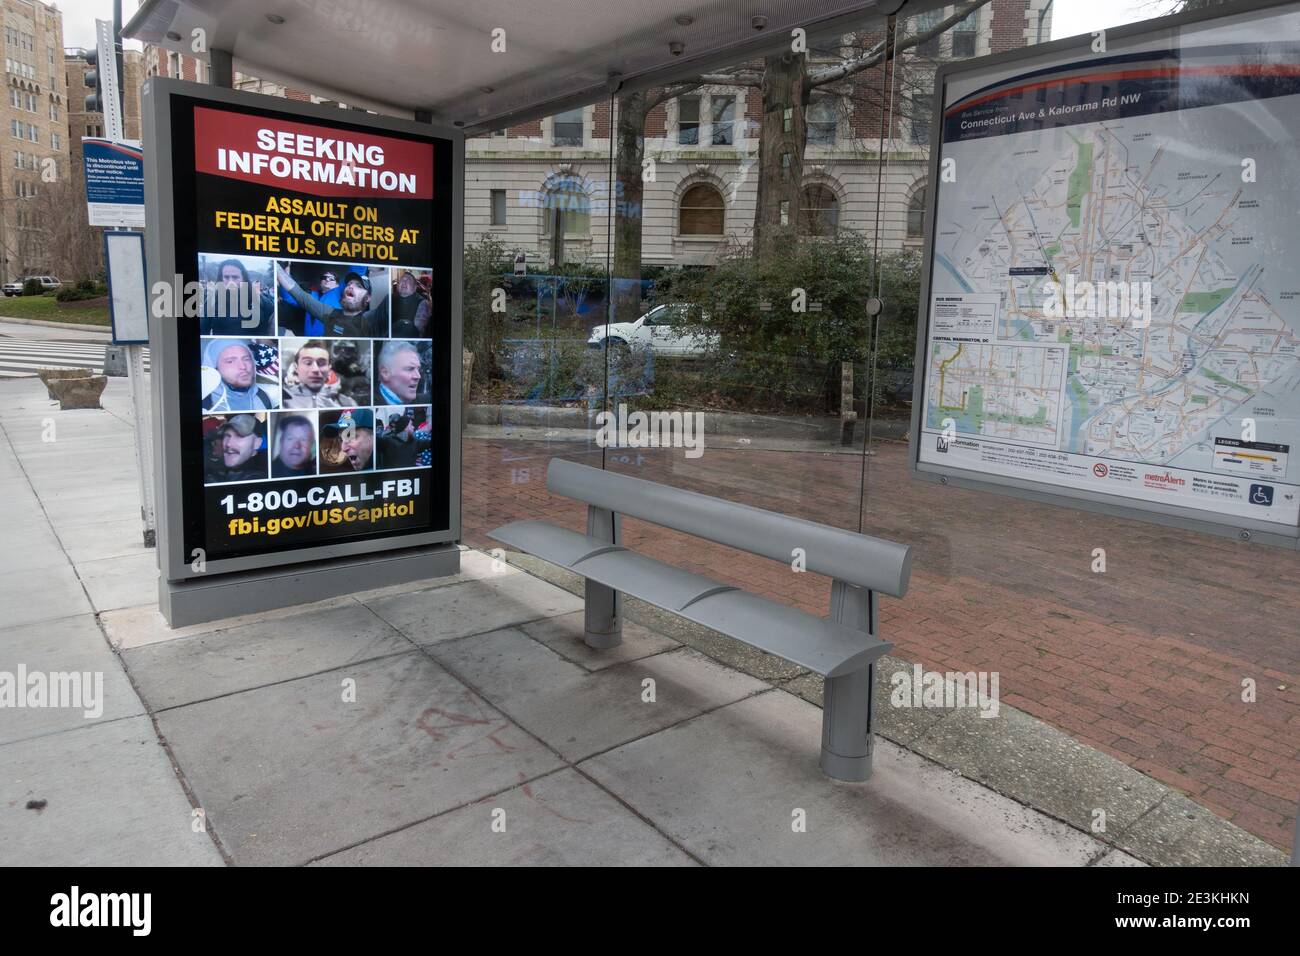 Digital sign at bus stop with rotating images of persons photographed during the storming of the U.S. Capitol on January 6, being sought by the Federal Bureau of Investigation. Washington, DC, Jan. 19, 2021 Stock Photo